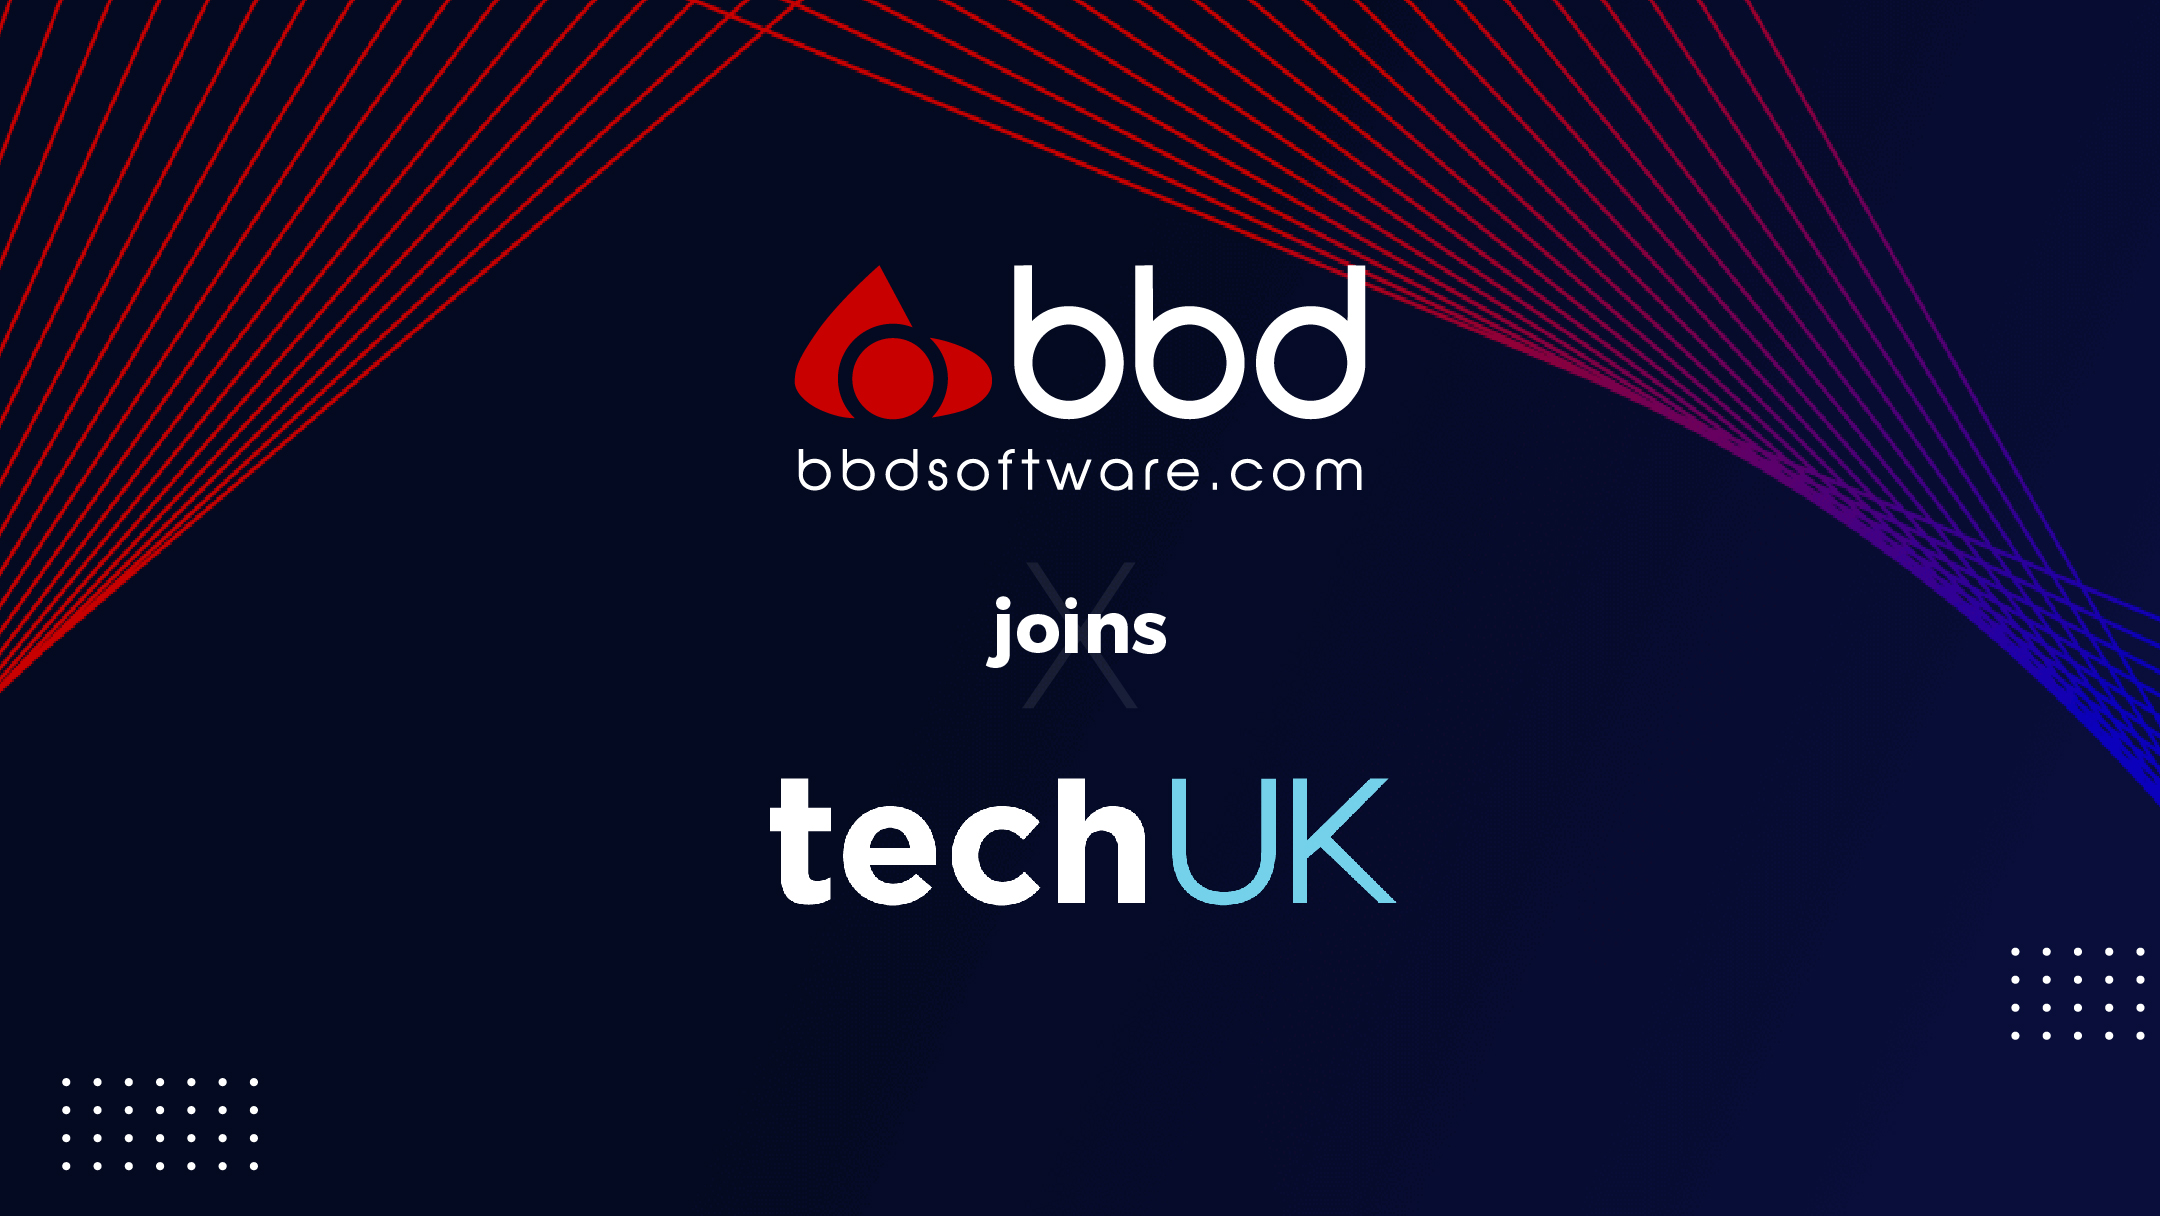 BBD joins techUK